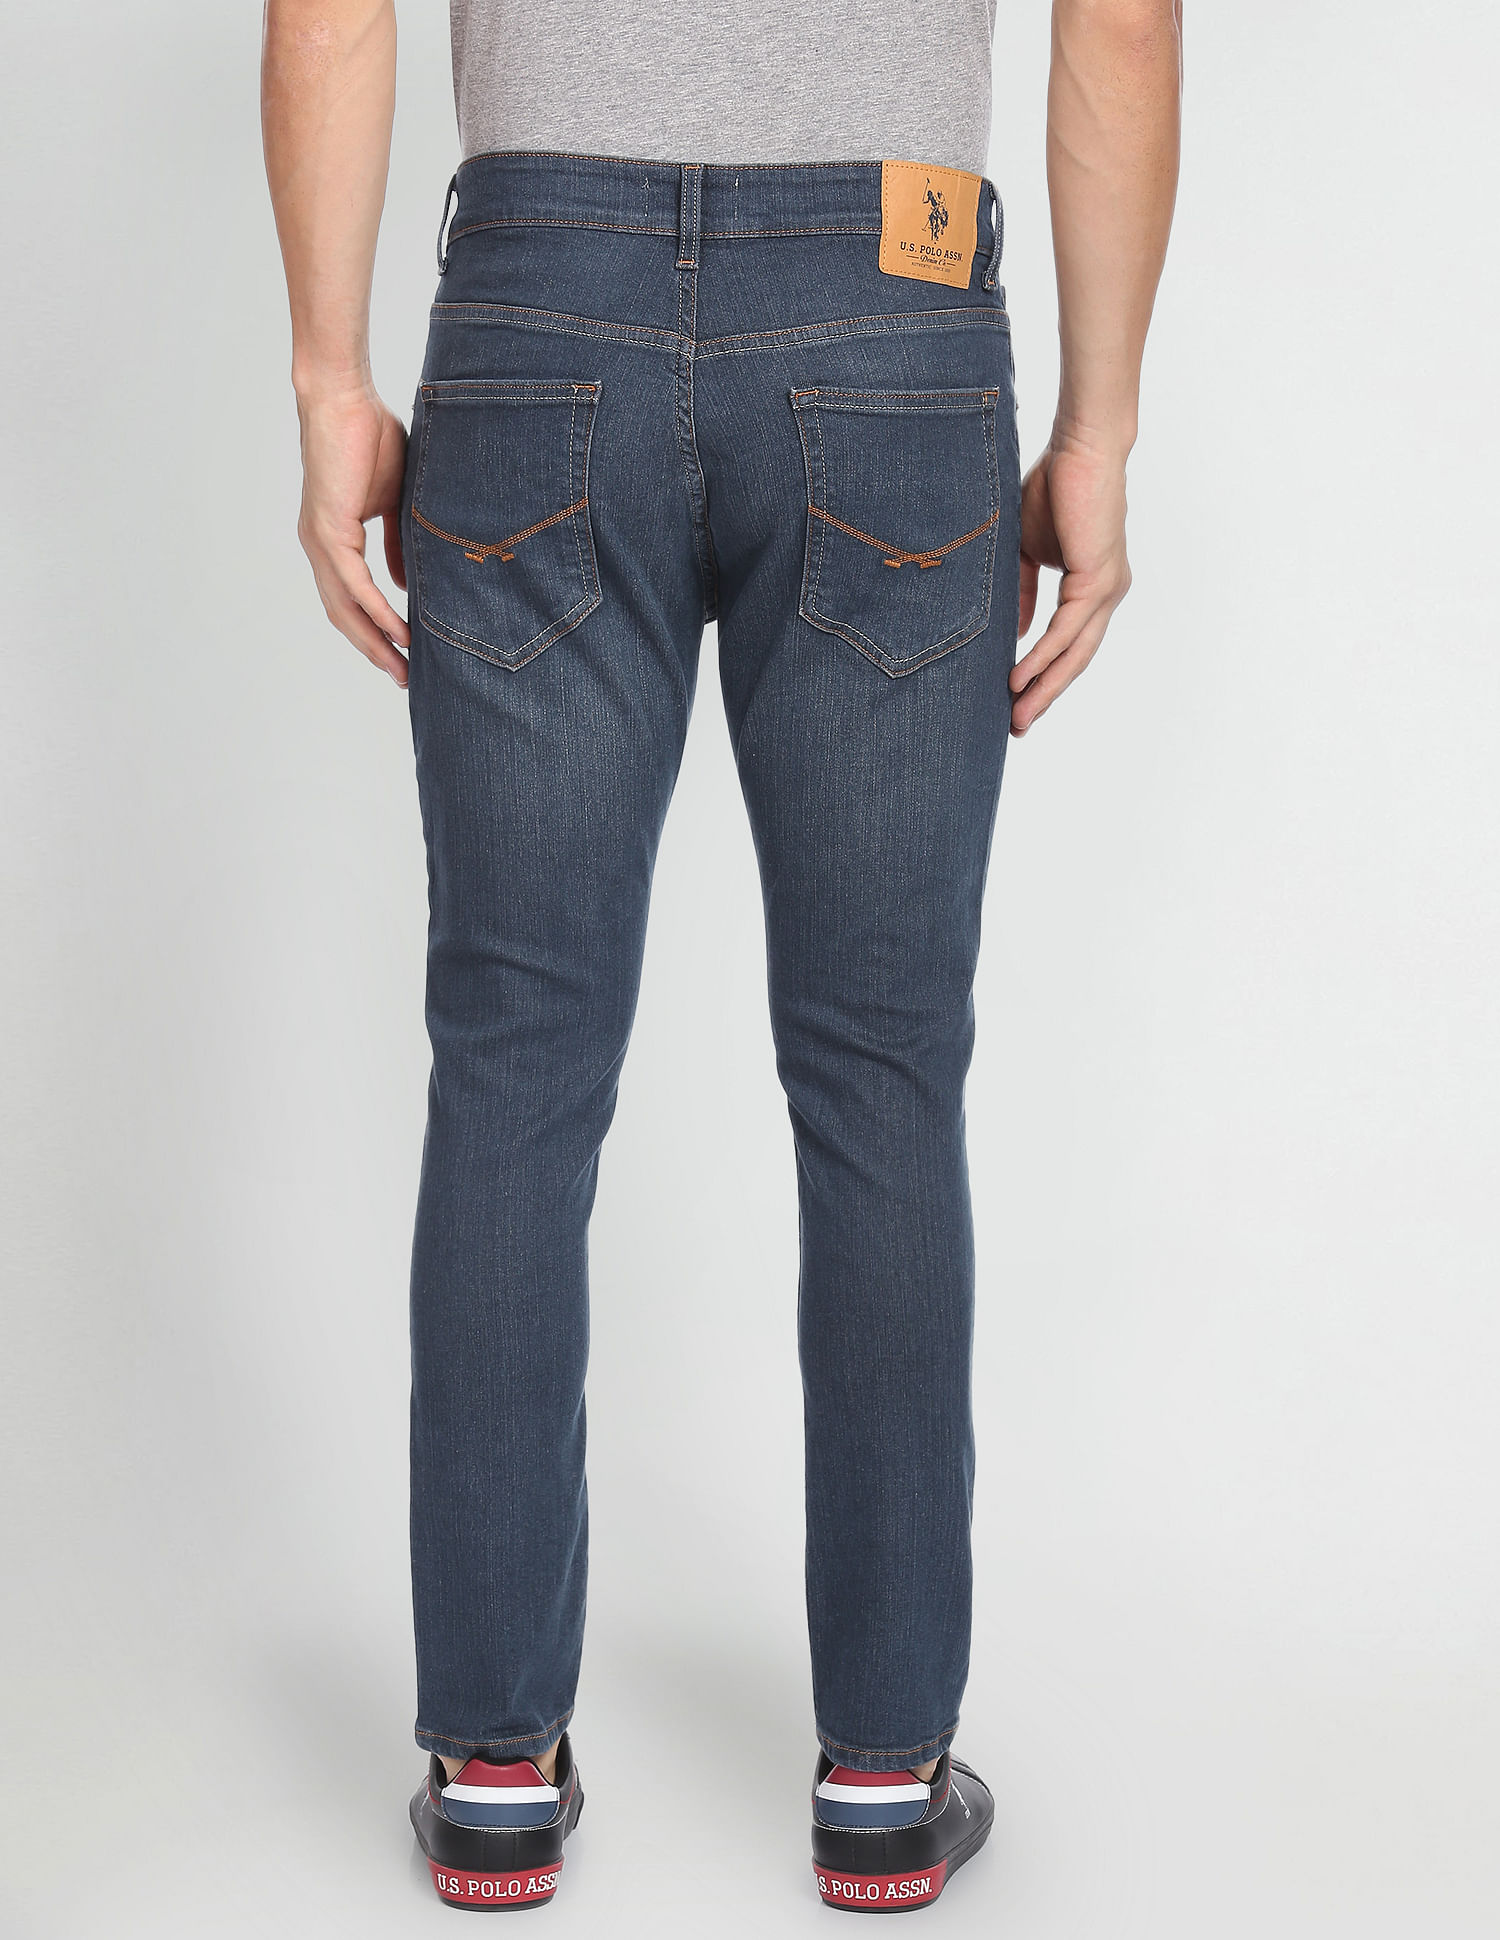 Buy U.S. Polo Assn. Denim Co. Henry Tapered Cropped Mid Rise Jeans - NNNOW. com